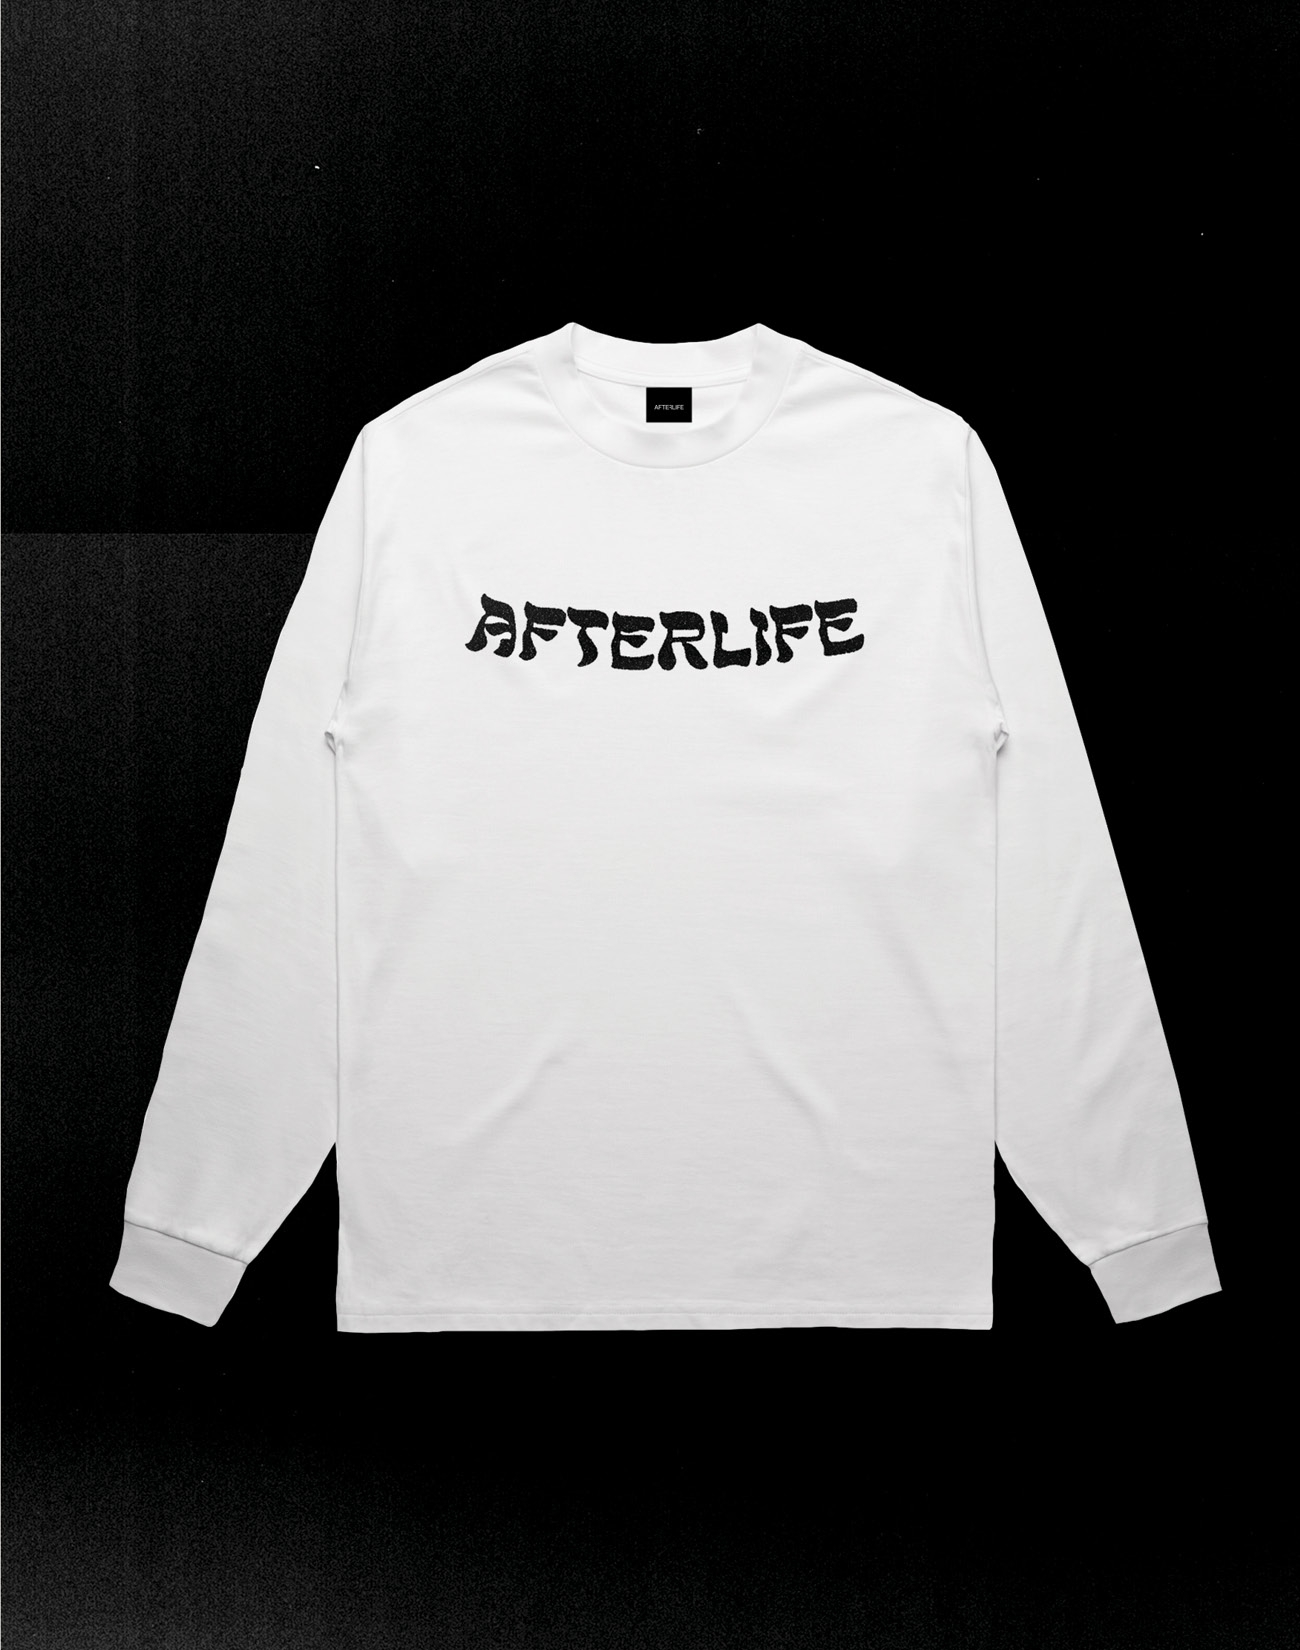 Afterlife - T-Shirt Graphic - Afterlife Wordmark | Atollon - a design company